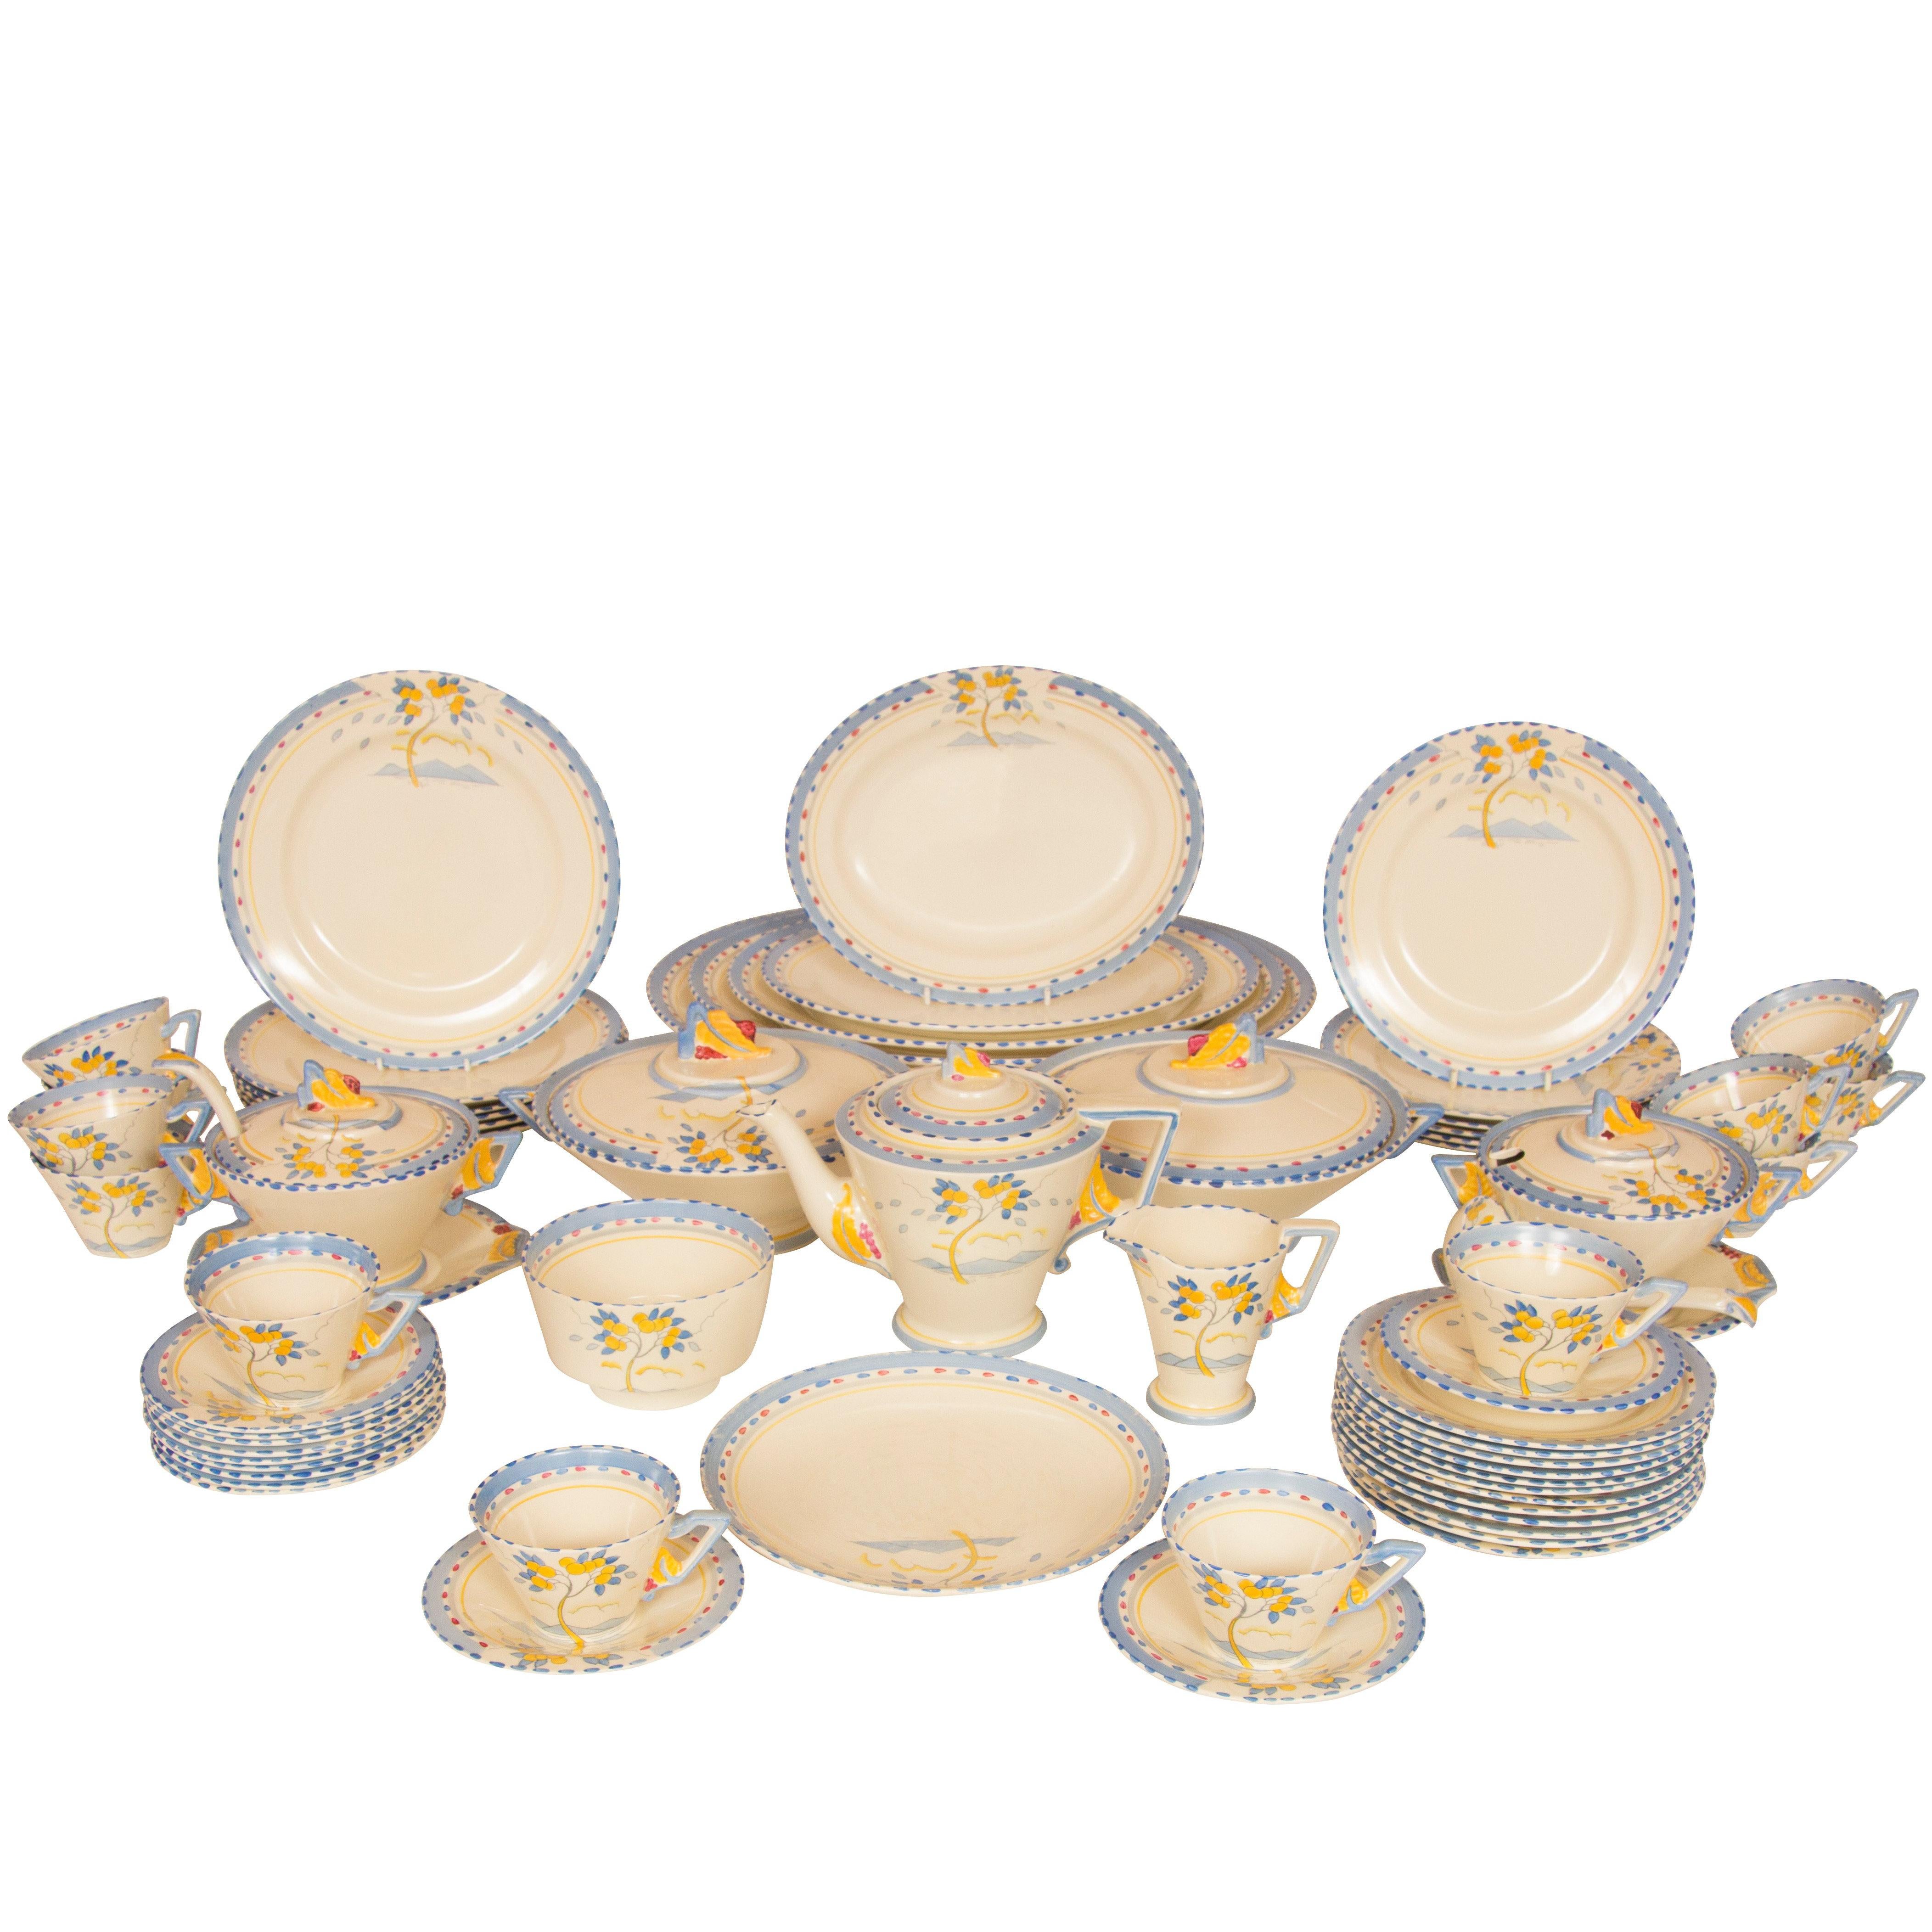 Art Deco Tea and Dinner Service by Burleigh Ware